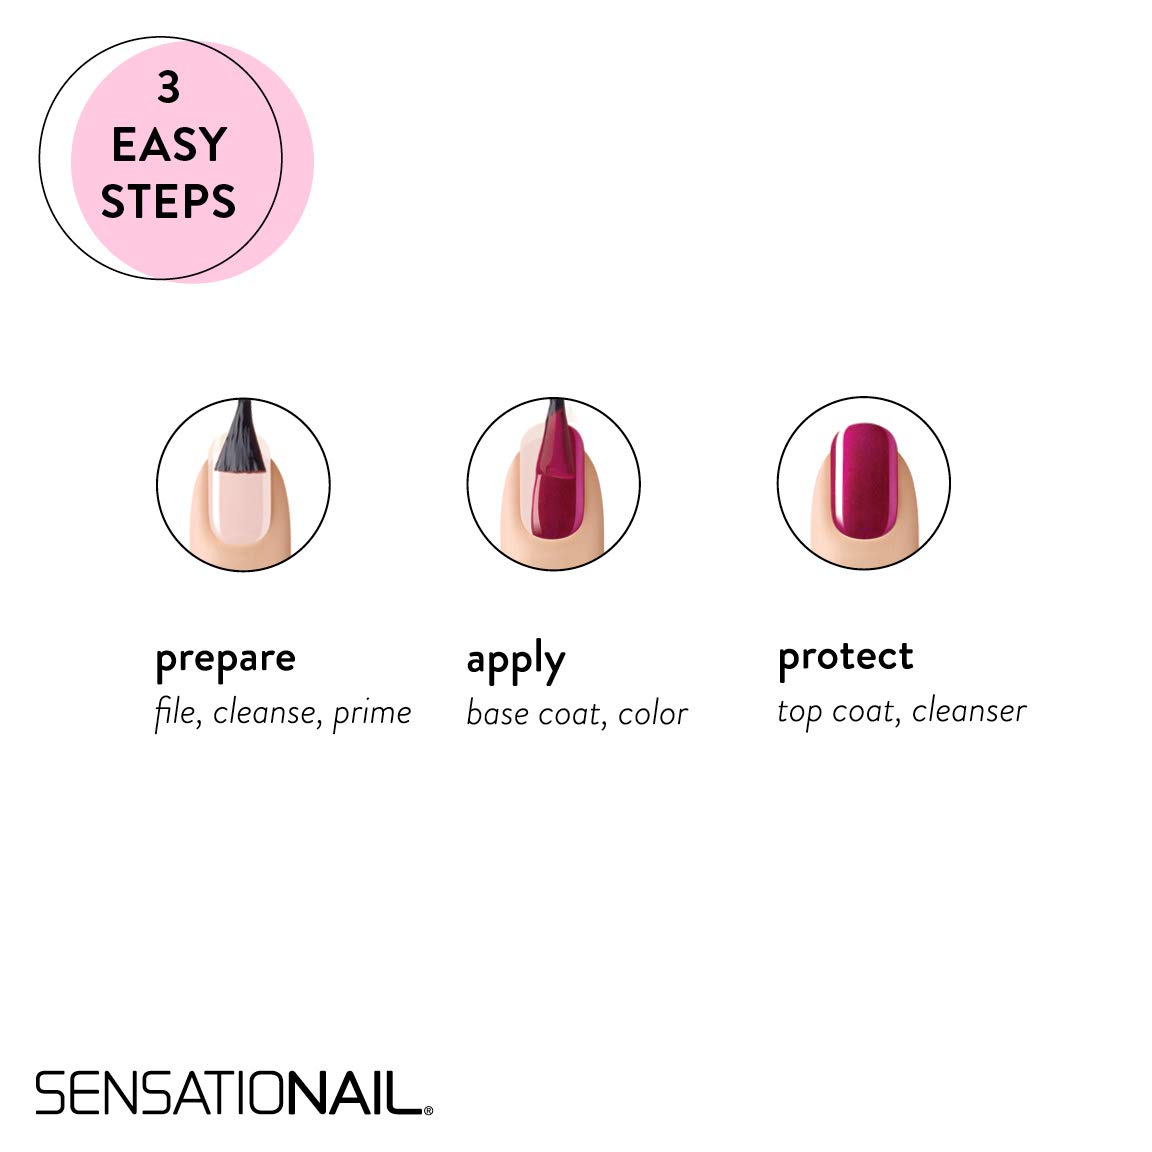 SensatioNail Gel Nail Polish Starter Kit, Pink Chiffon - At-Home Gel Nail Kit with Everything Needed for 10 Manicures - Lasts up